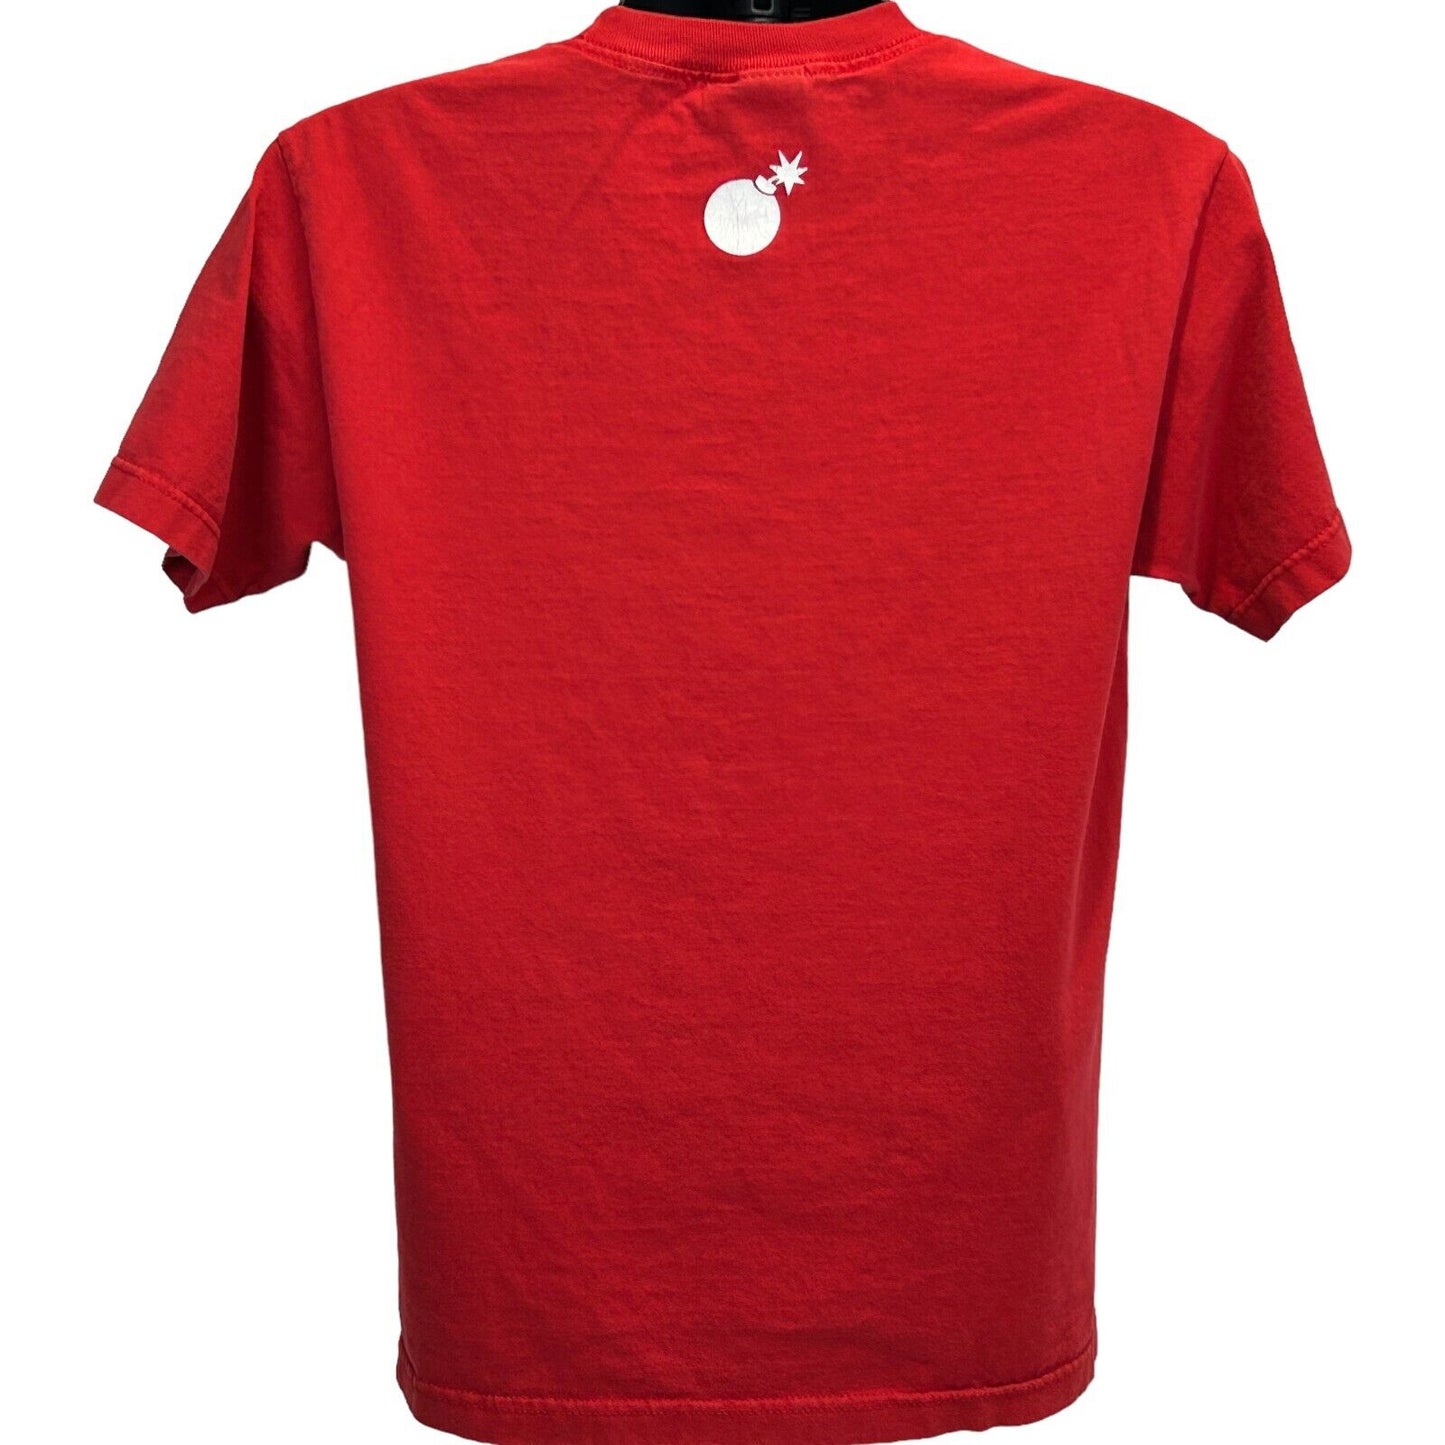 The Hundreds T Shirt Medium Streetwear Spellout Bomb Graphic Tee Mens Red